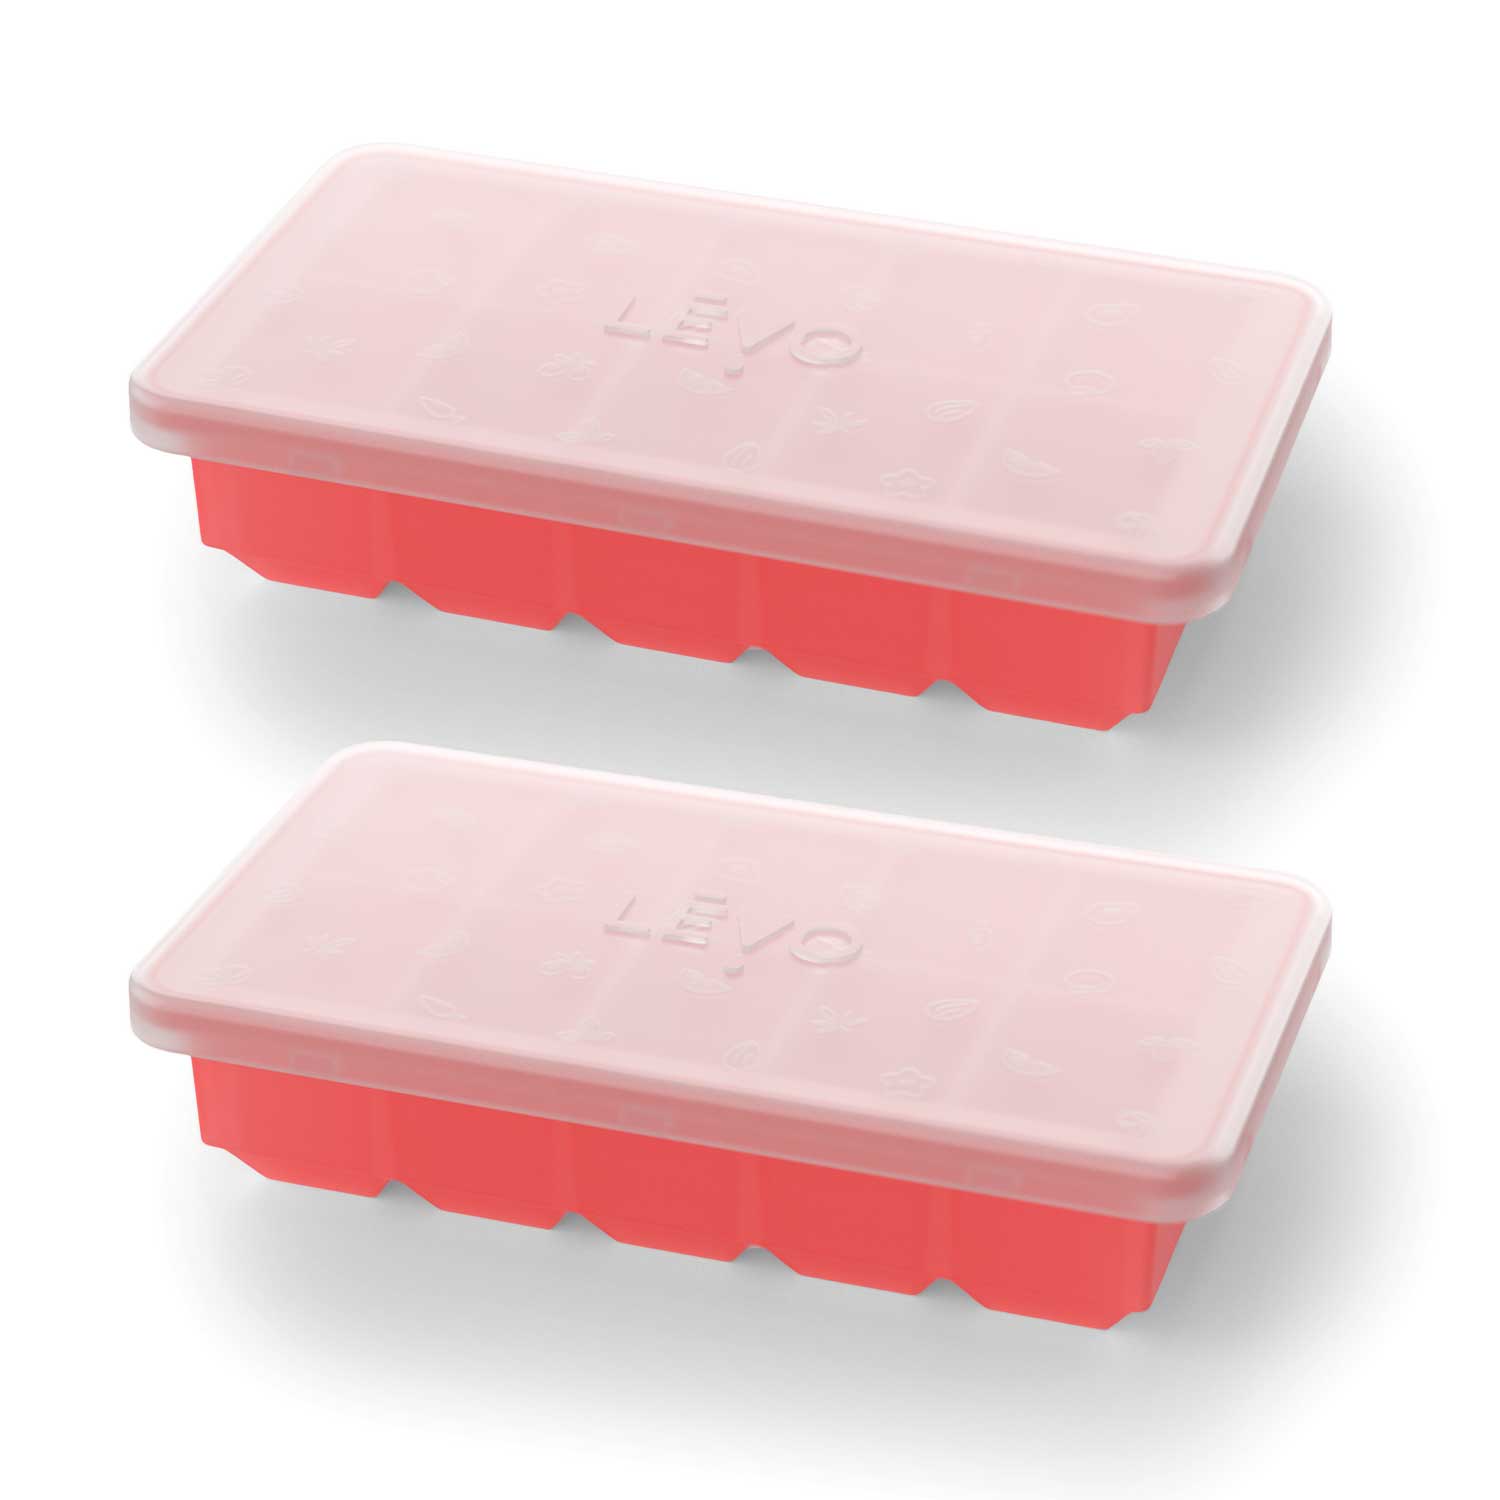 2 LĒVO Herb Block Trays with lid in Red